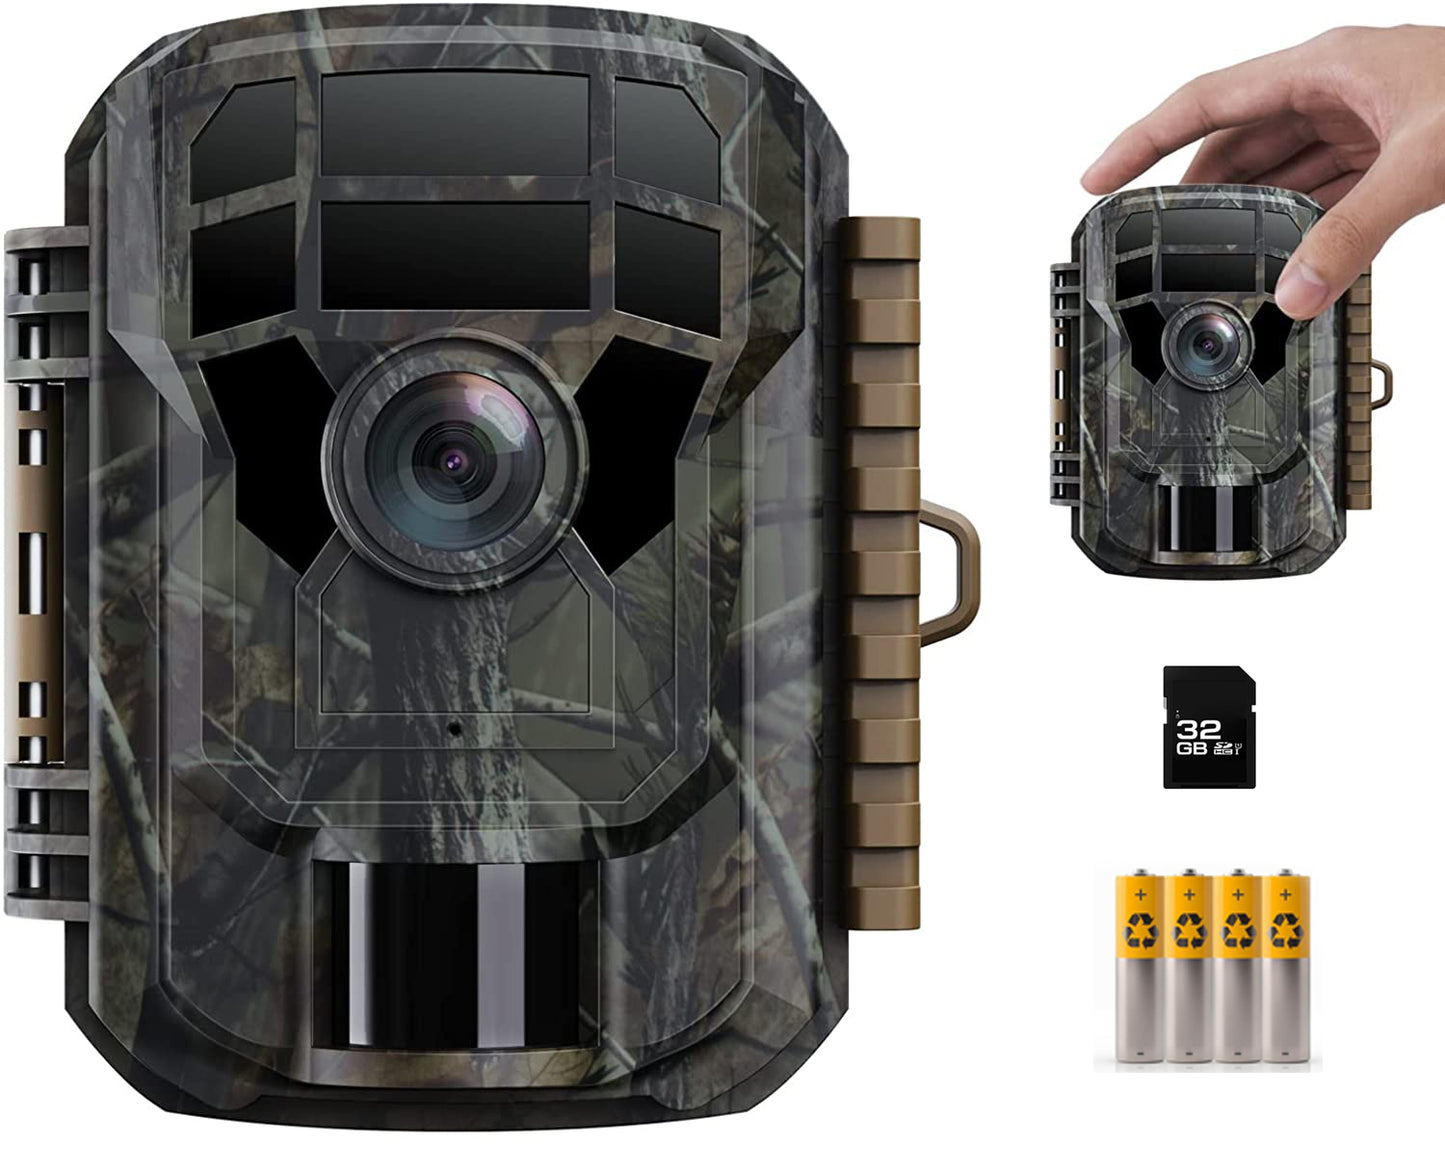 CAMPARK Trail Camera 24MP 1080P Game Camera with 32GB SD Card and 4AA Batteries Hunting Deer Camera with Infrared Night Vision Waterproof Motion Activated Trail Cam for Wildlife Monitoring